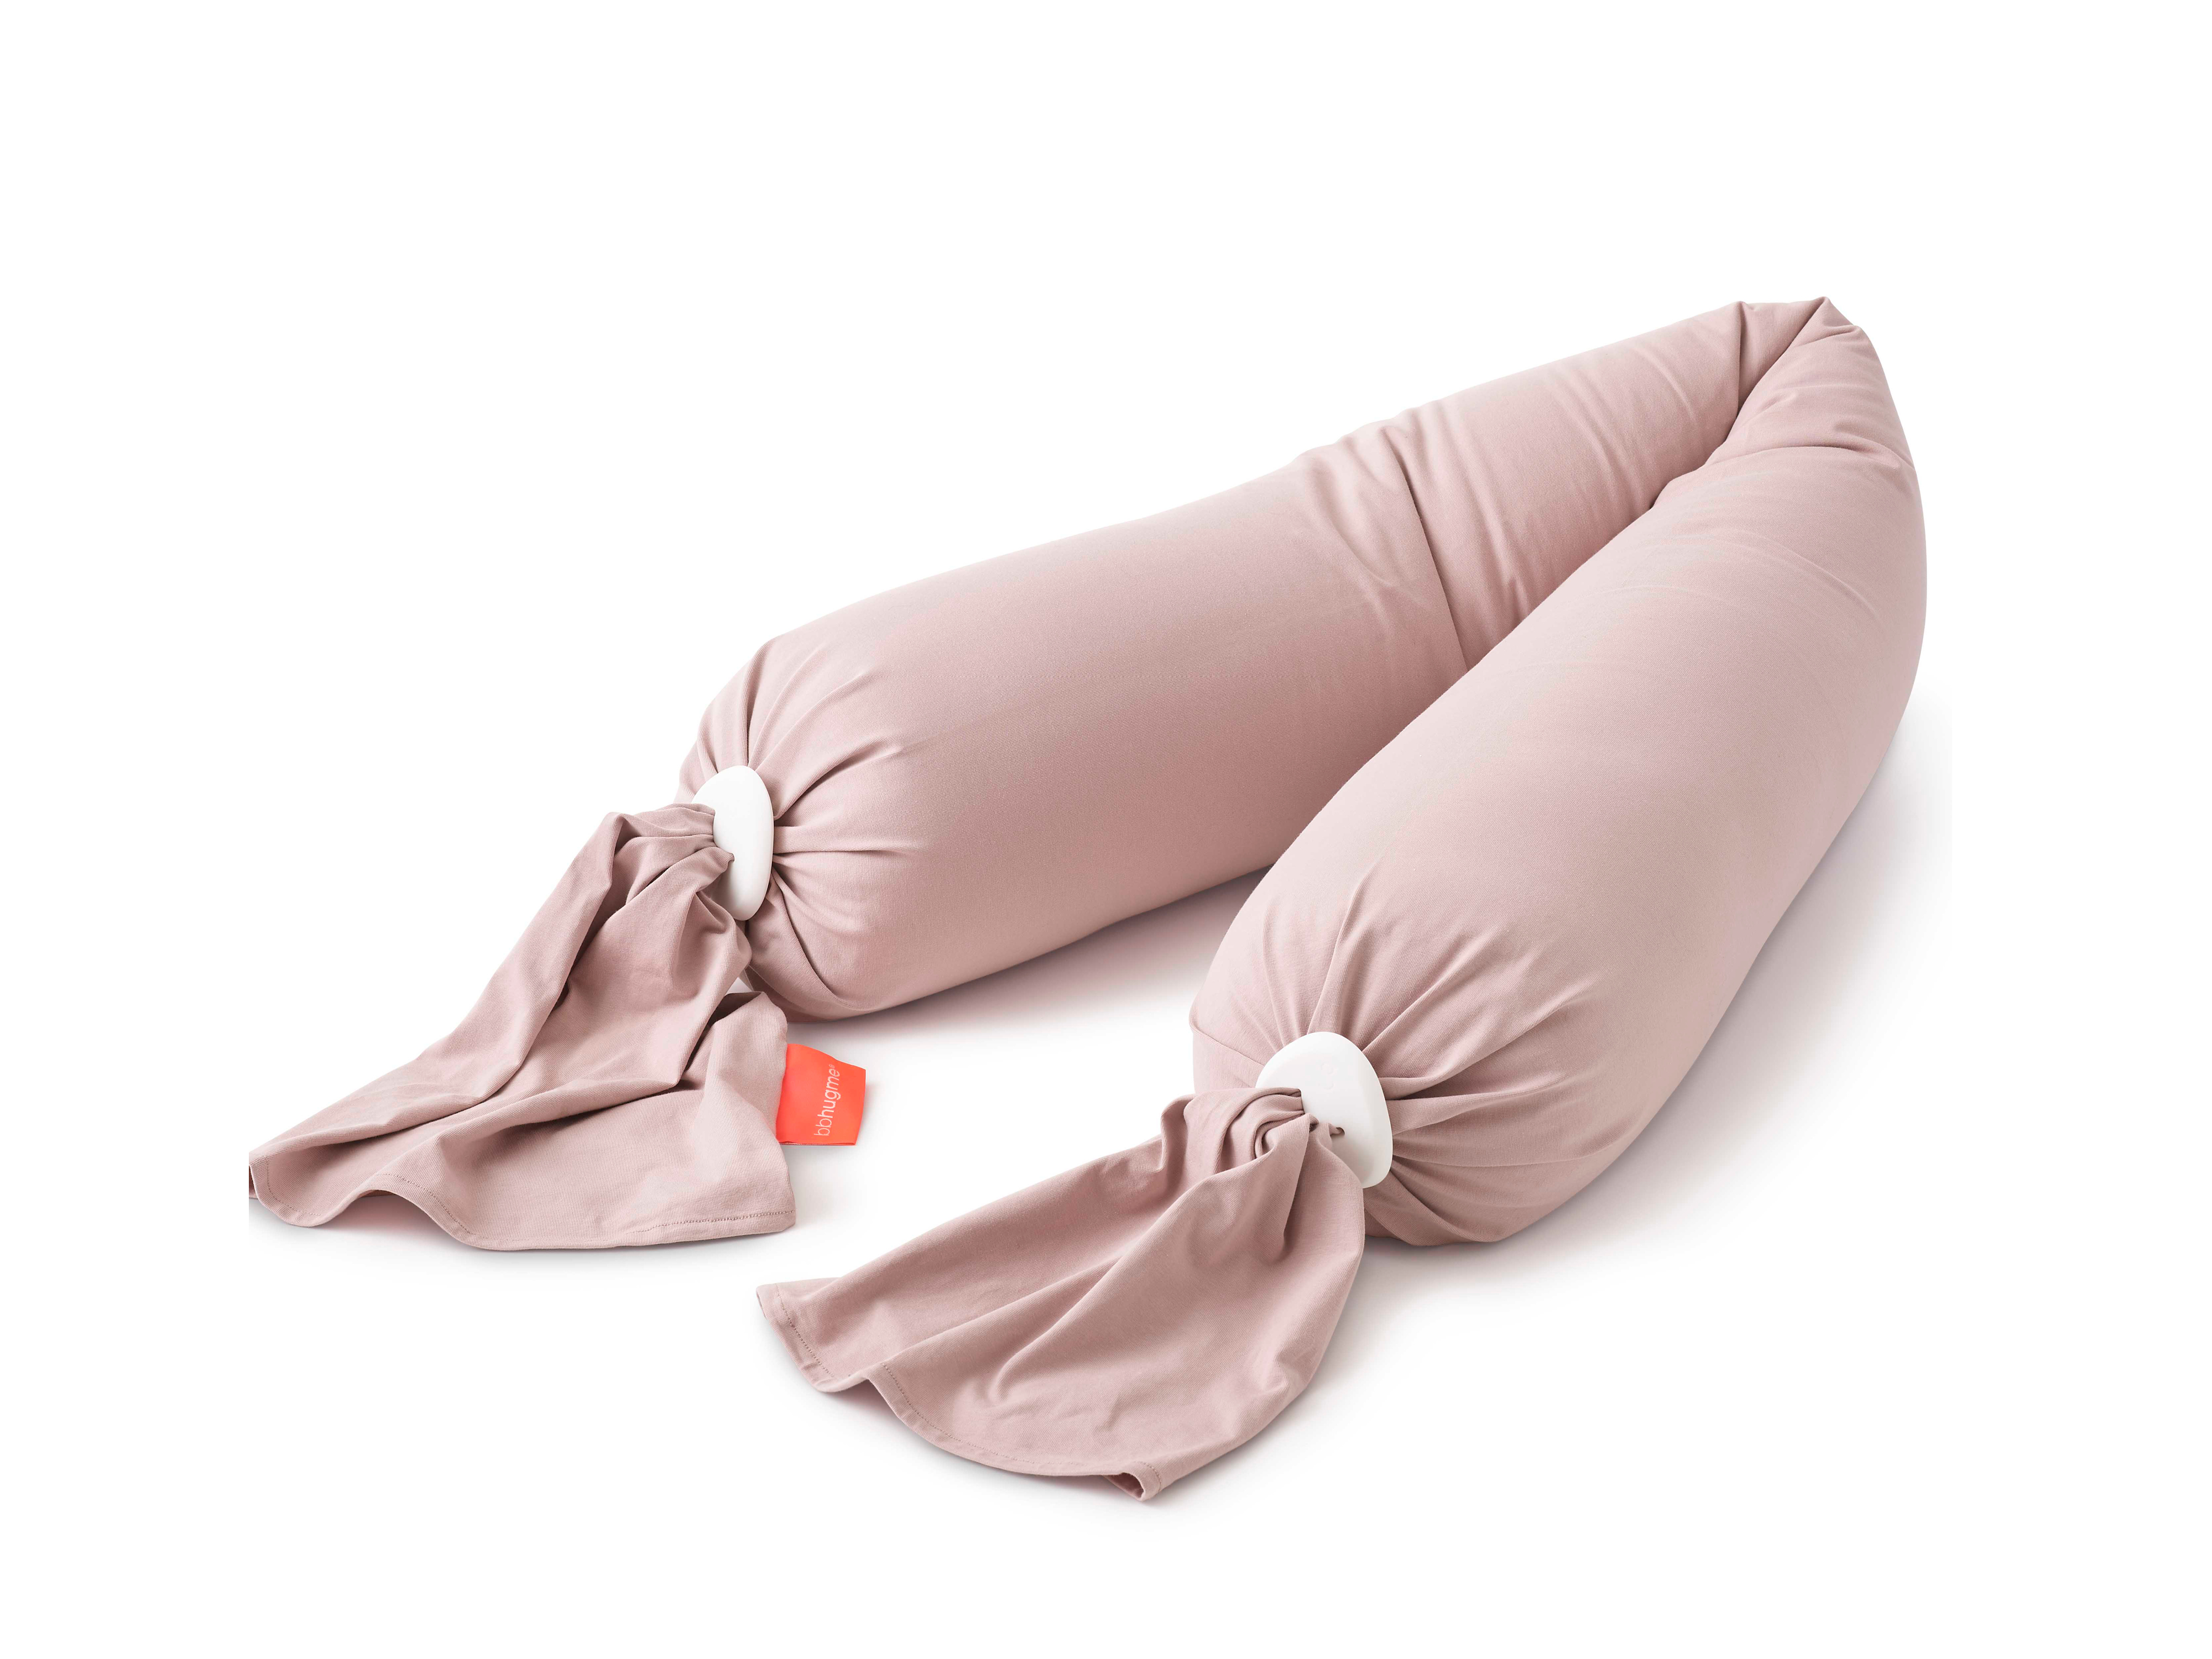 bbhugme Pregnancy Pillow Cover, Dusty Pink, 1 stk.